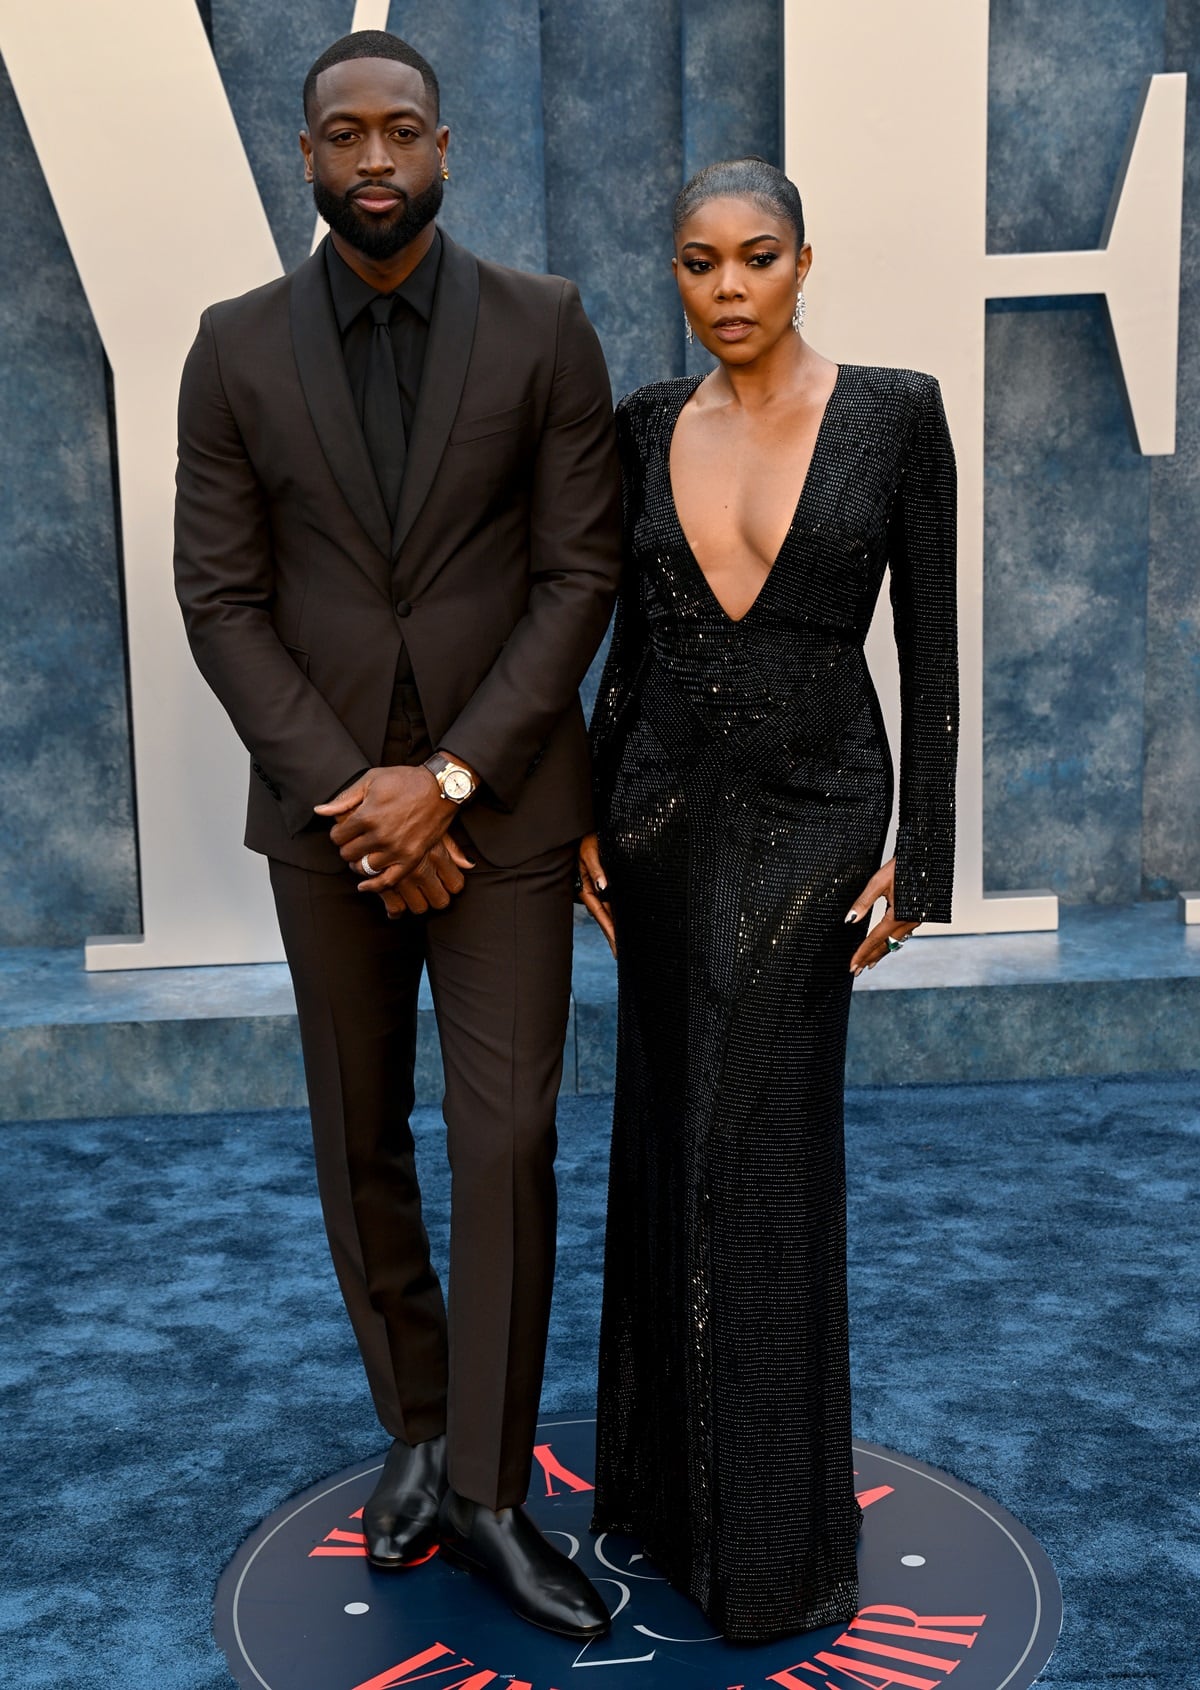 Gabrielle Union stunned in a Ralph Lauren gown while her husband Dwyane Wade donned an ensemble from Prada at the 2023 Vanity Fair Oscar Party